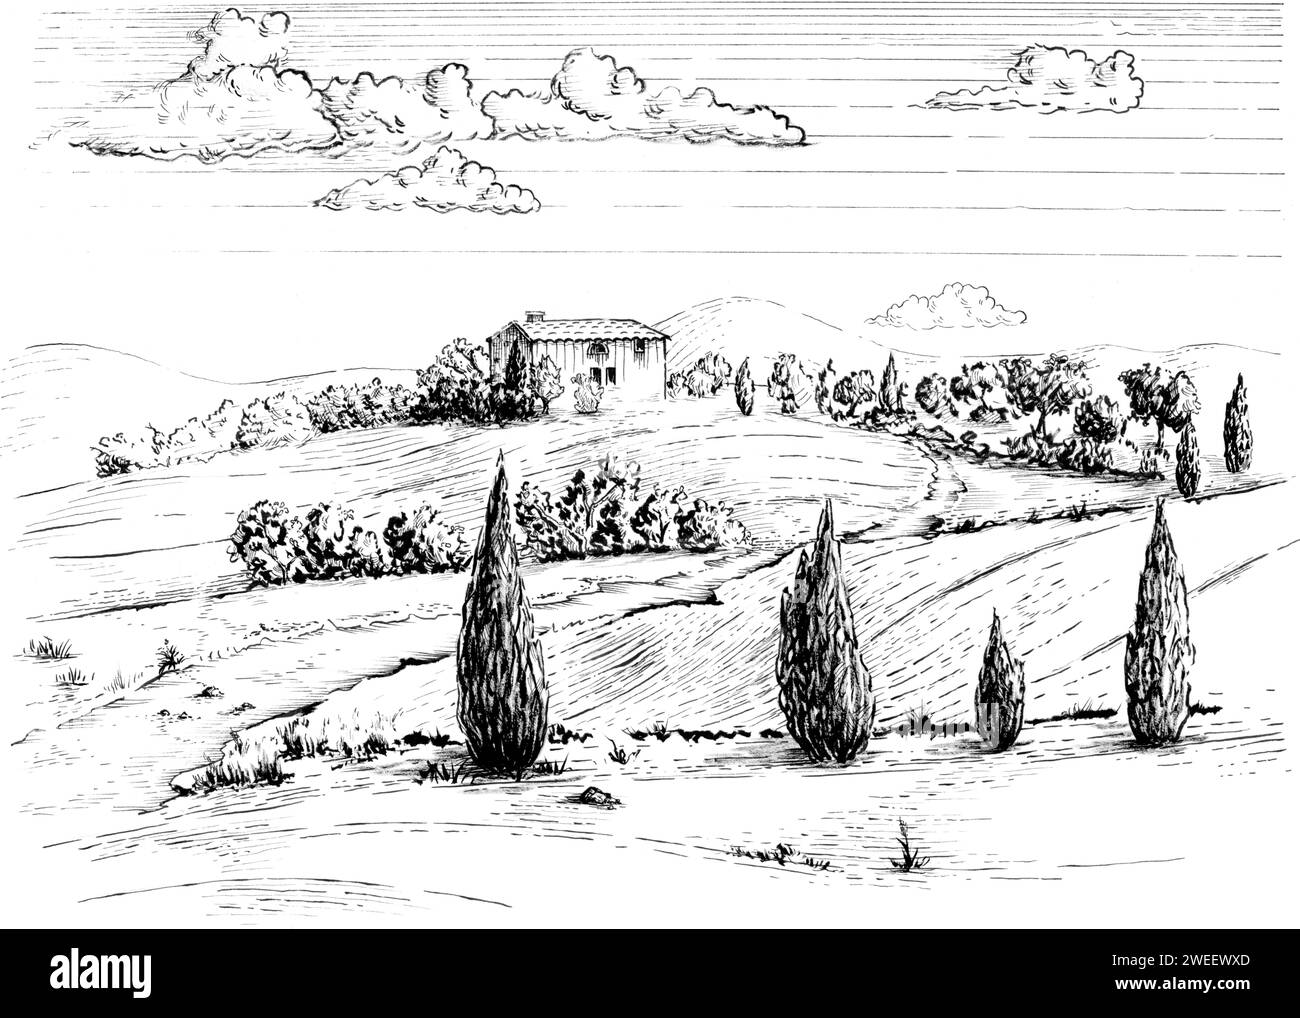 Ink drawing of a typical mediterranean rural landscape. Traditional illustration on paper. Stock Photo